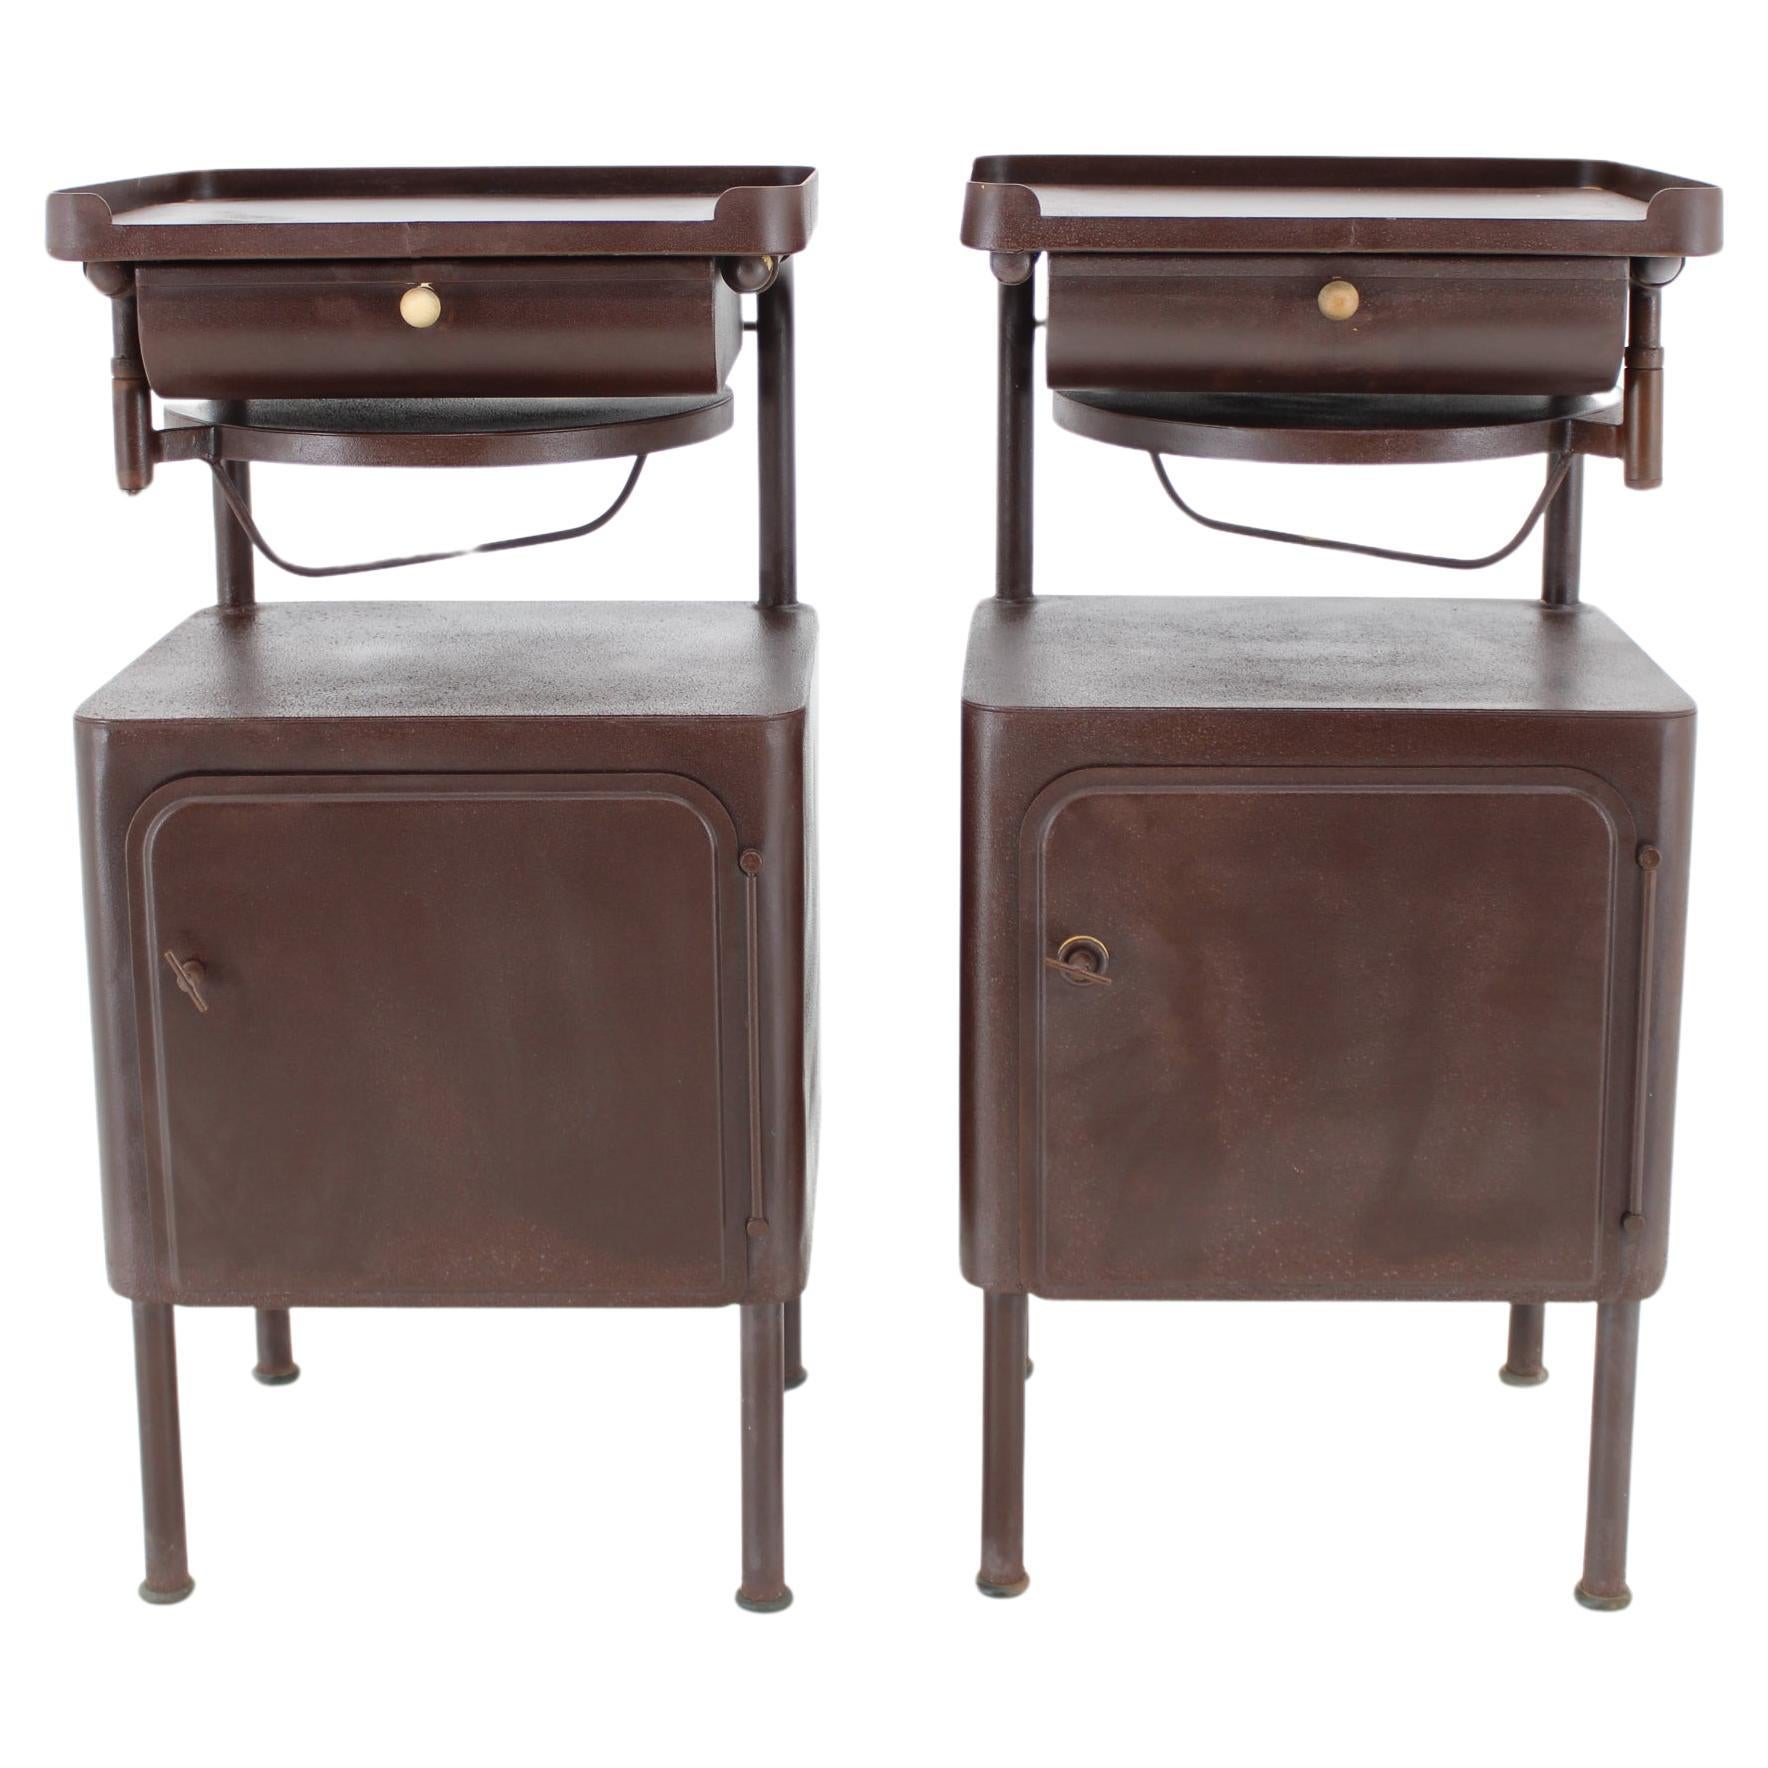 1940s Pair of Industrial Nightstands with Pull Out Table, Czechoslovakia For Sale